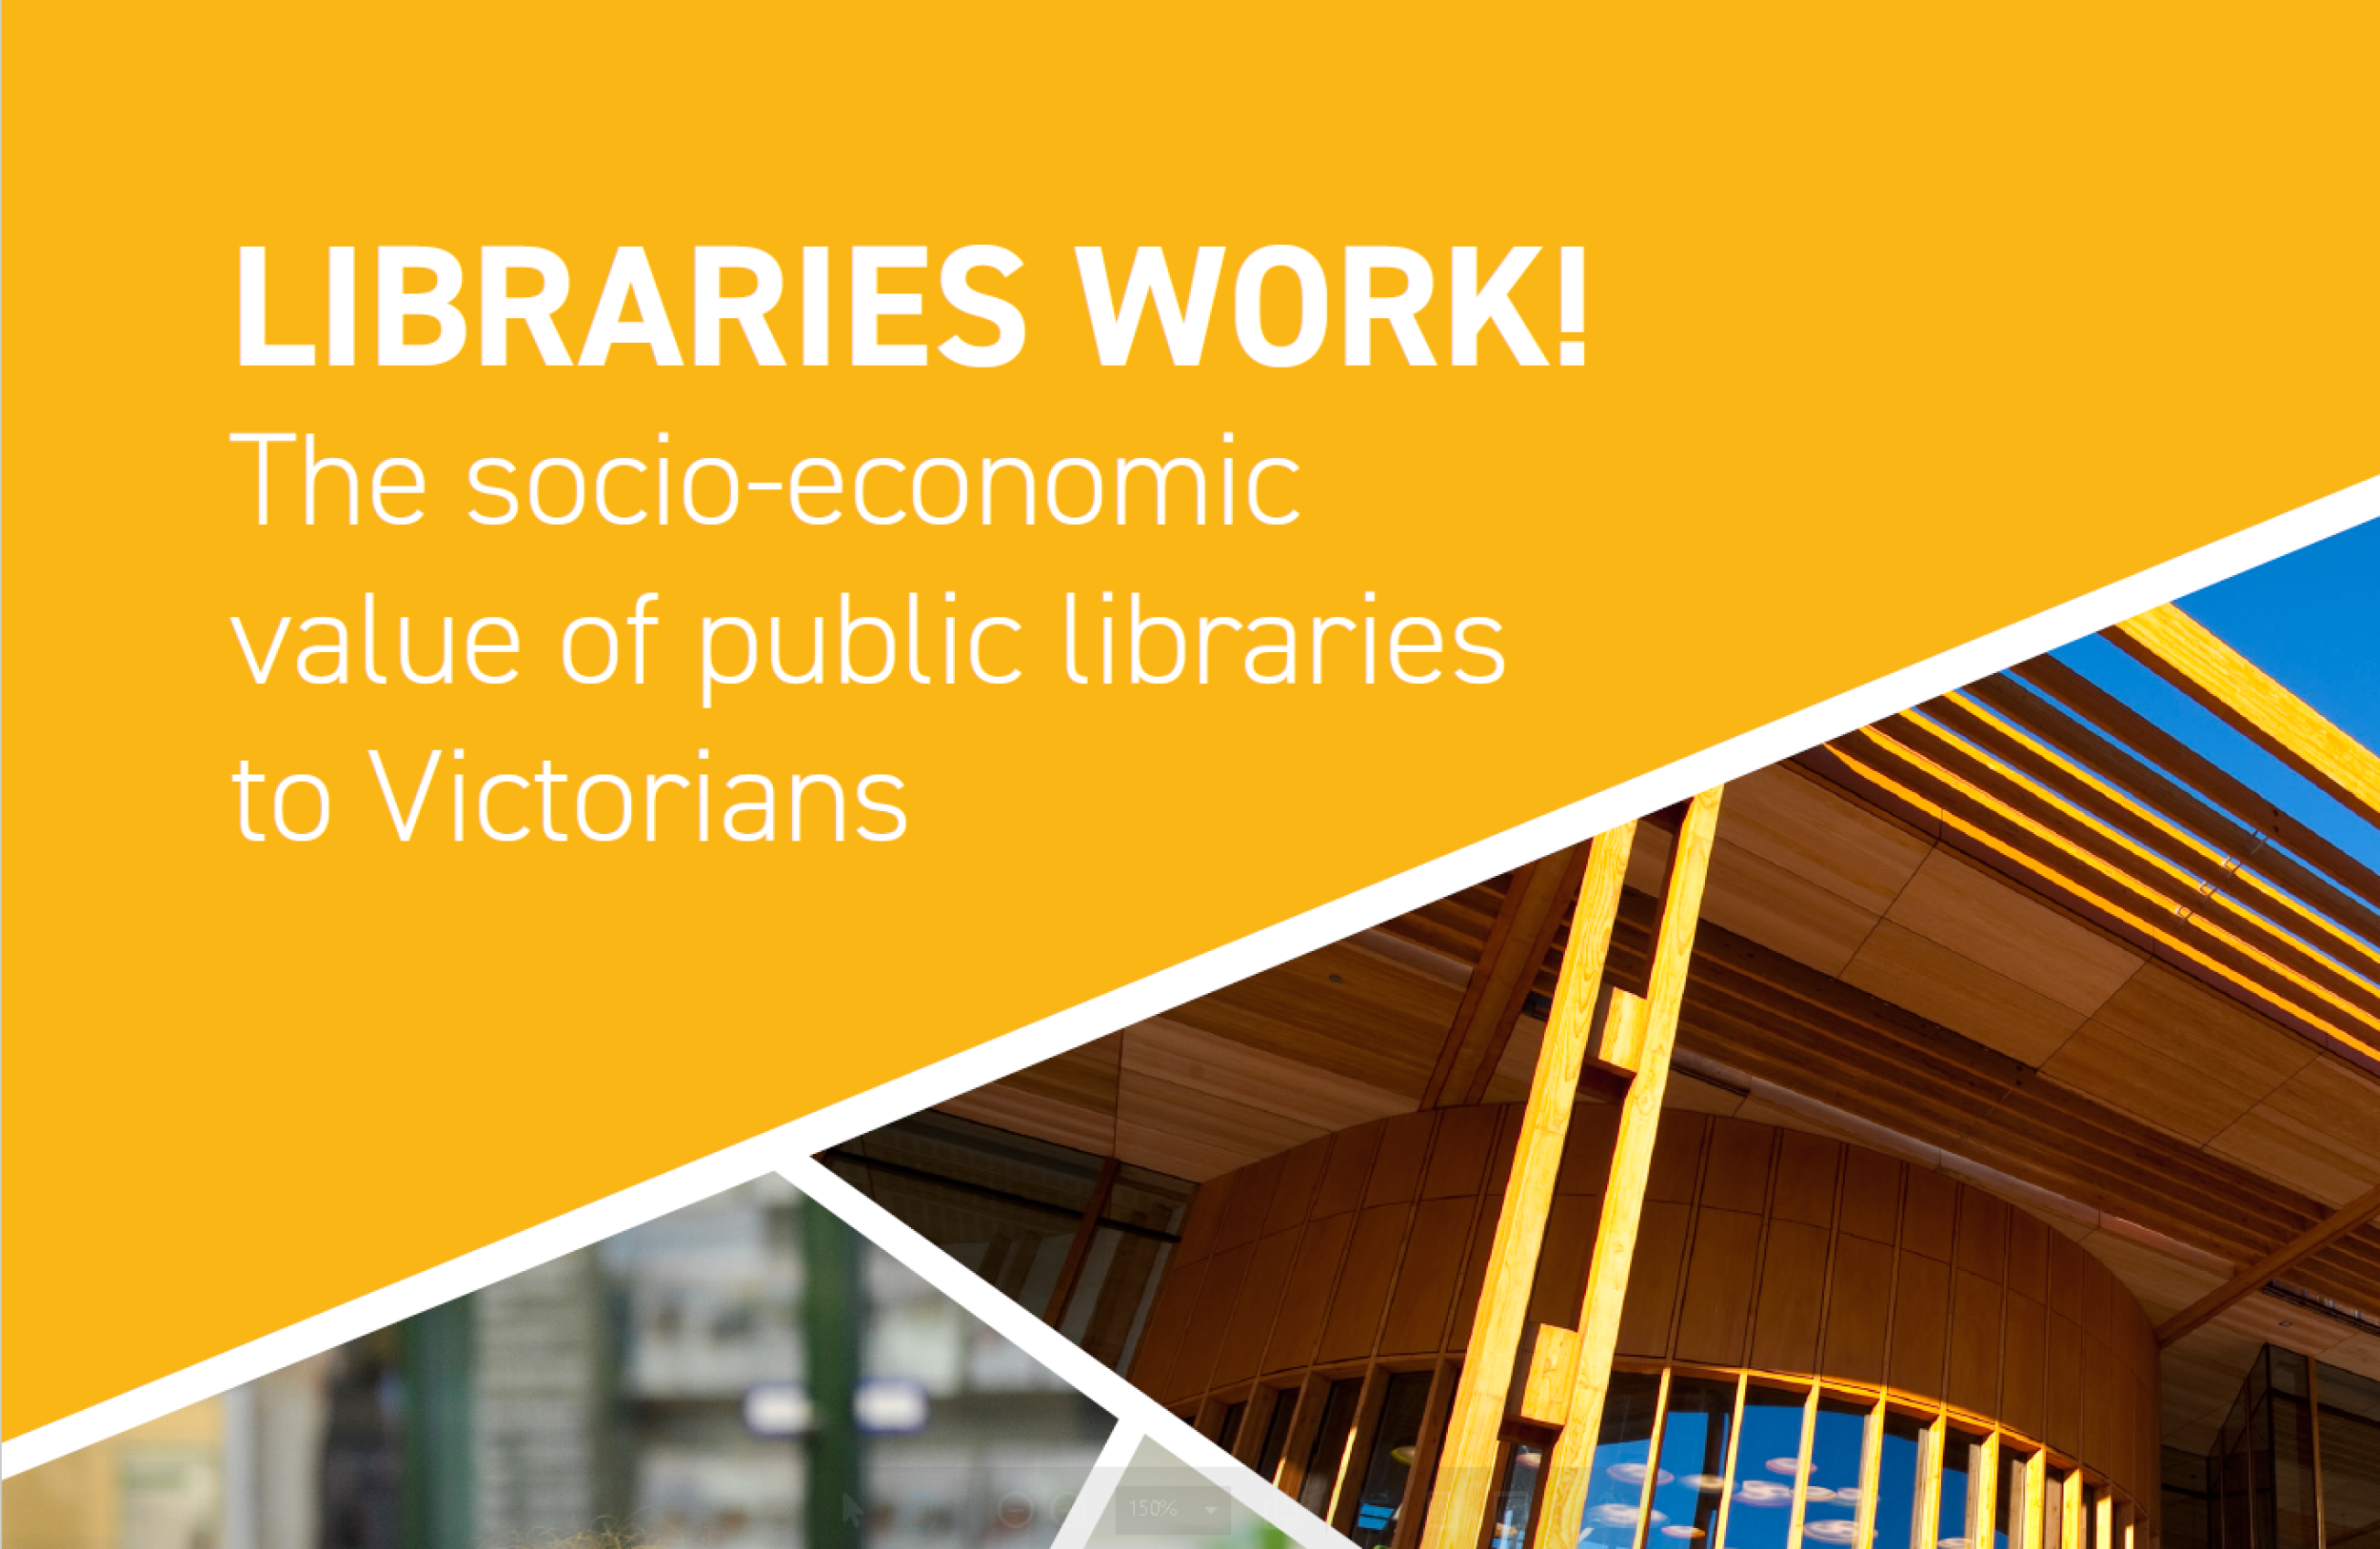 SGS Economics and Planning Libraries Work